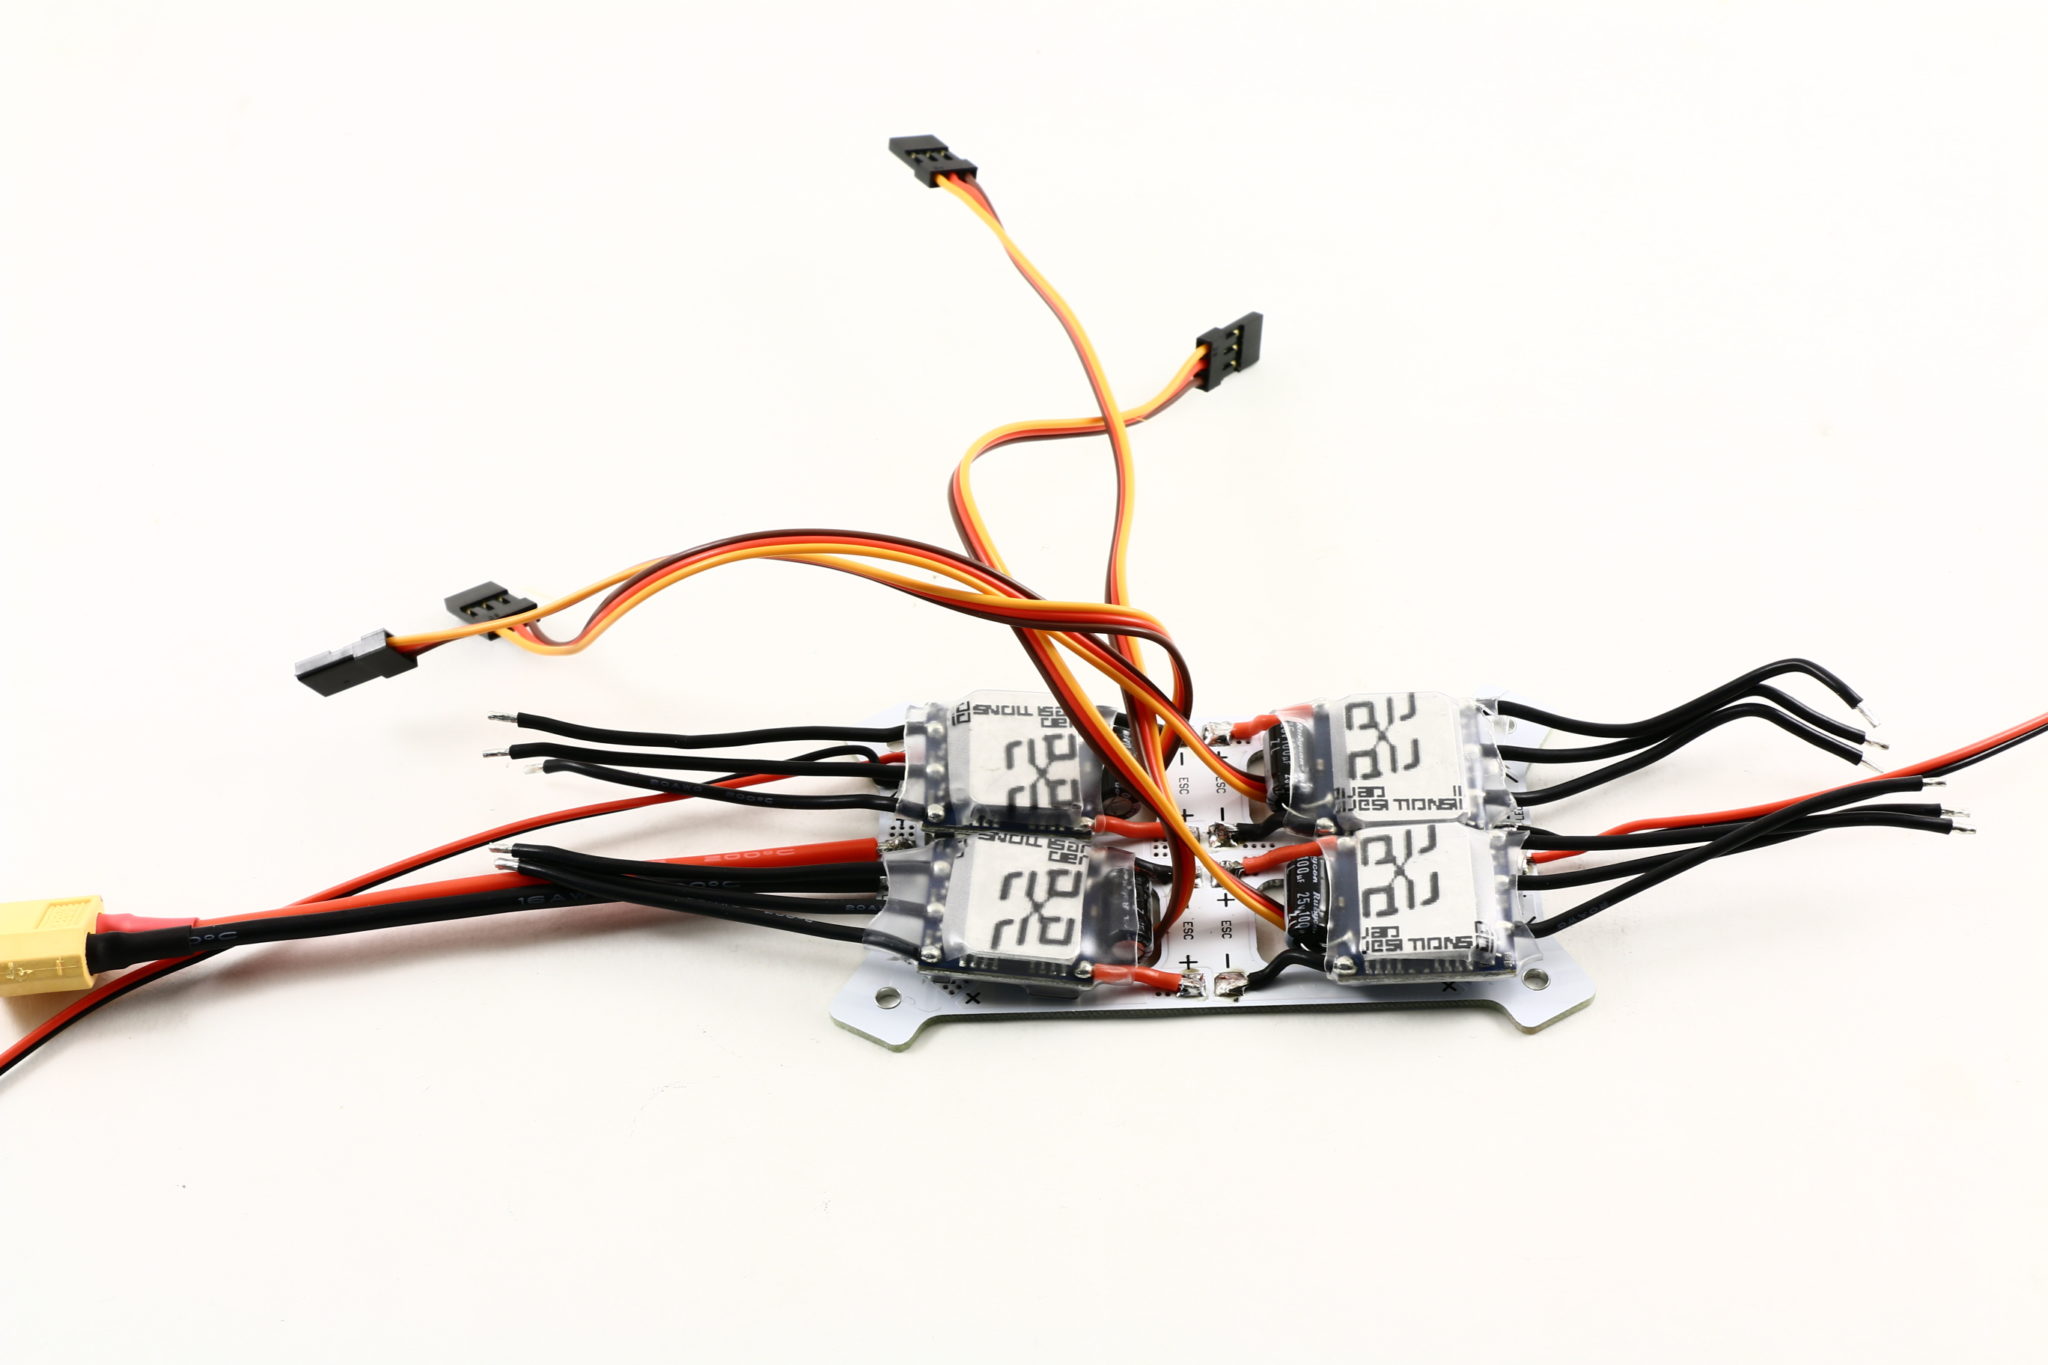 Blue 12a simon k ESCs for QAV250. These fit well in the QAV250 on the PDB (Pictured not included)